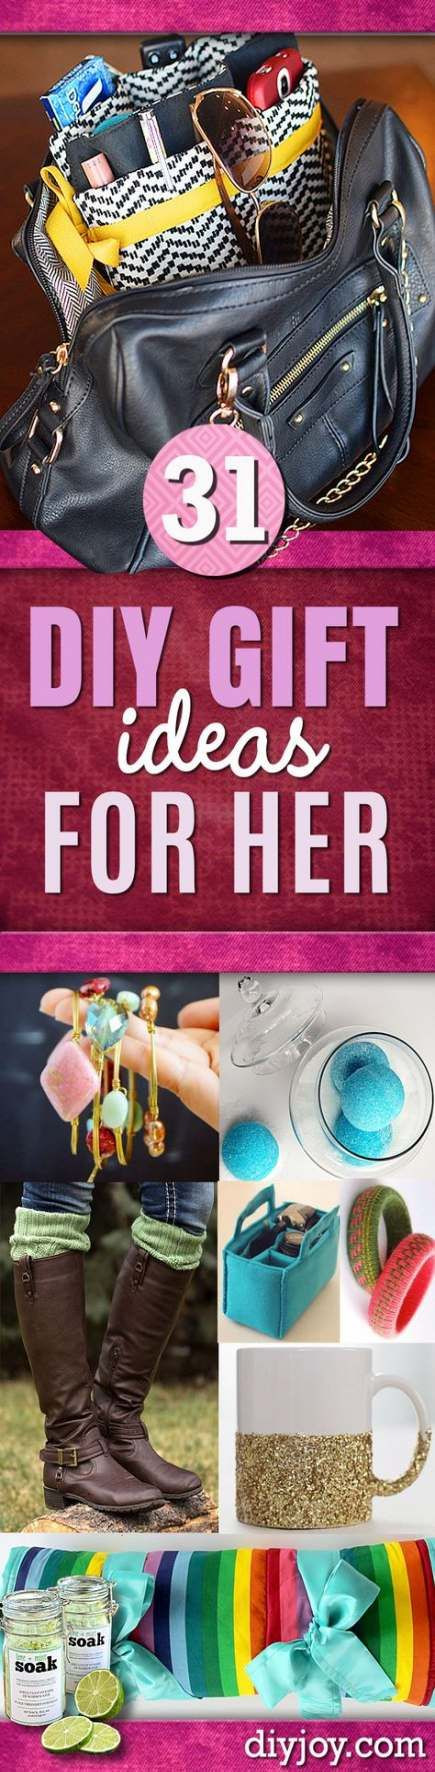 Gift Ideas For New Girlfriend
 New Diy Gifts For Her Christmas Daughters Ideas